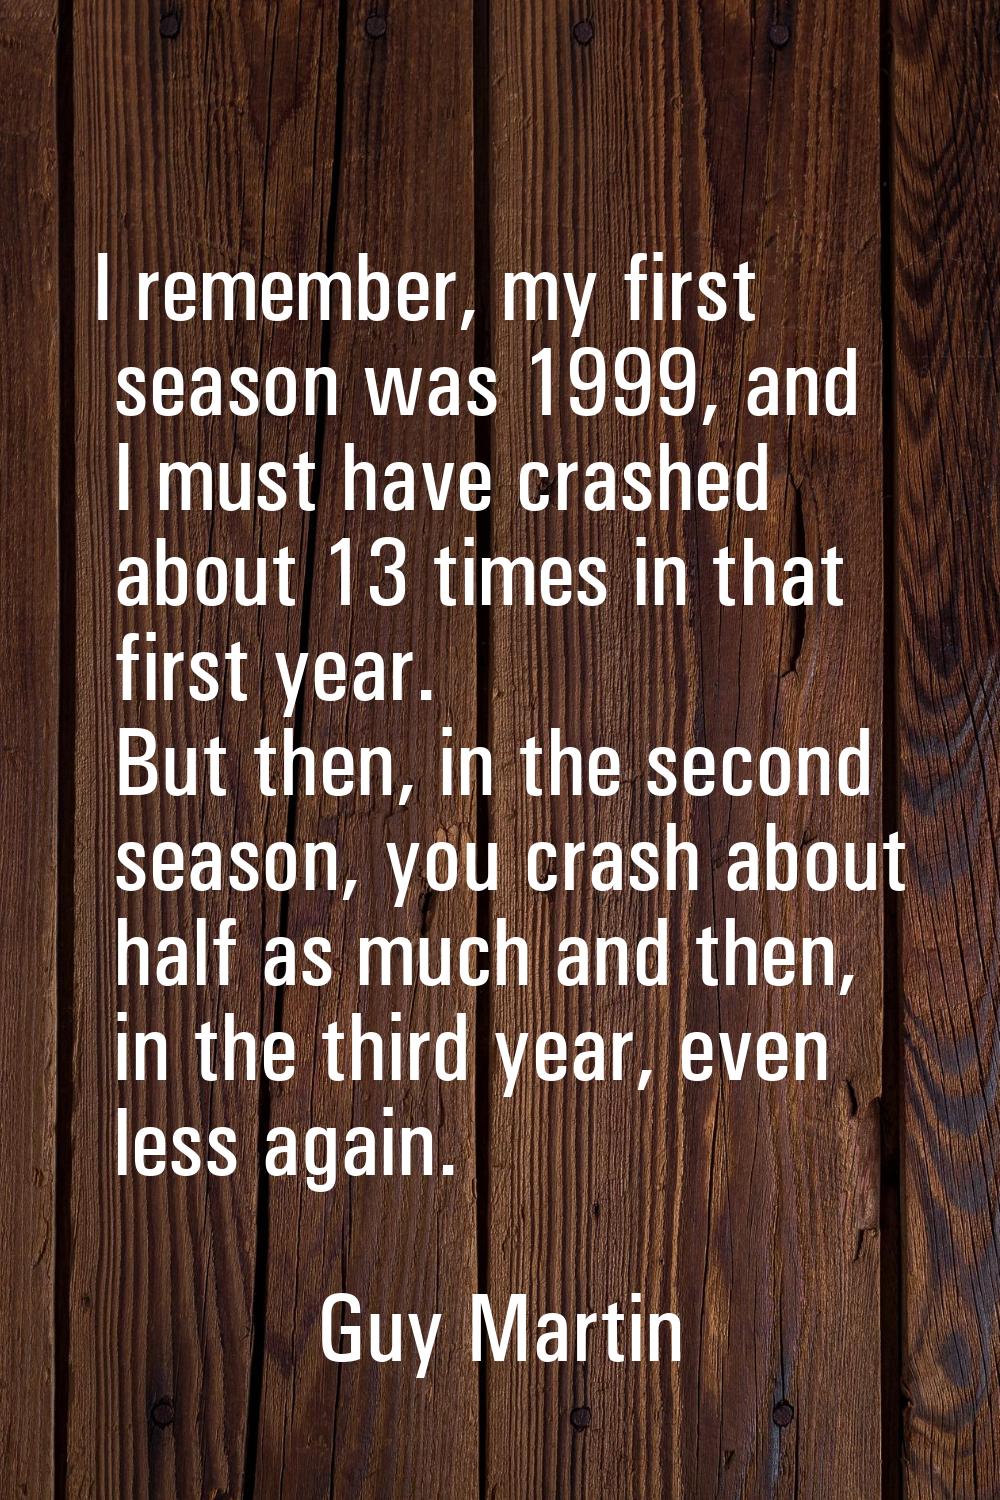 I remember, my first season was 1999, and I must have crashed about 13 times in that first year. Bu